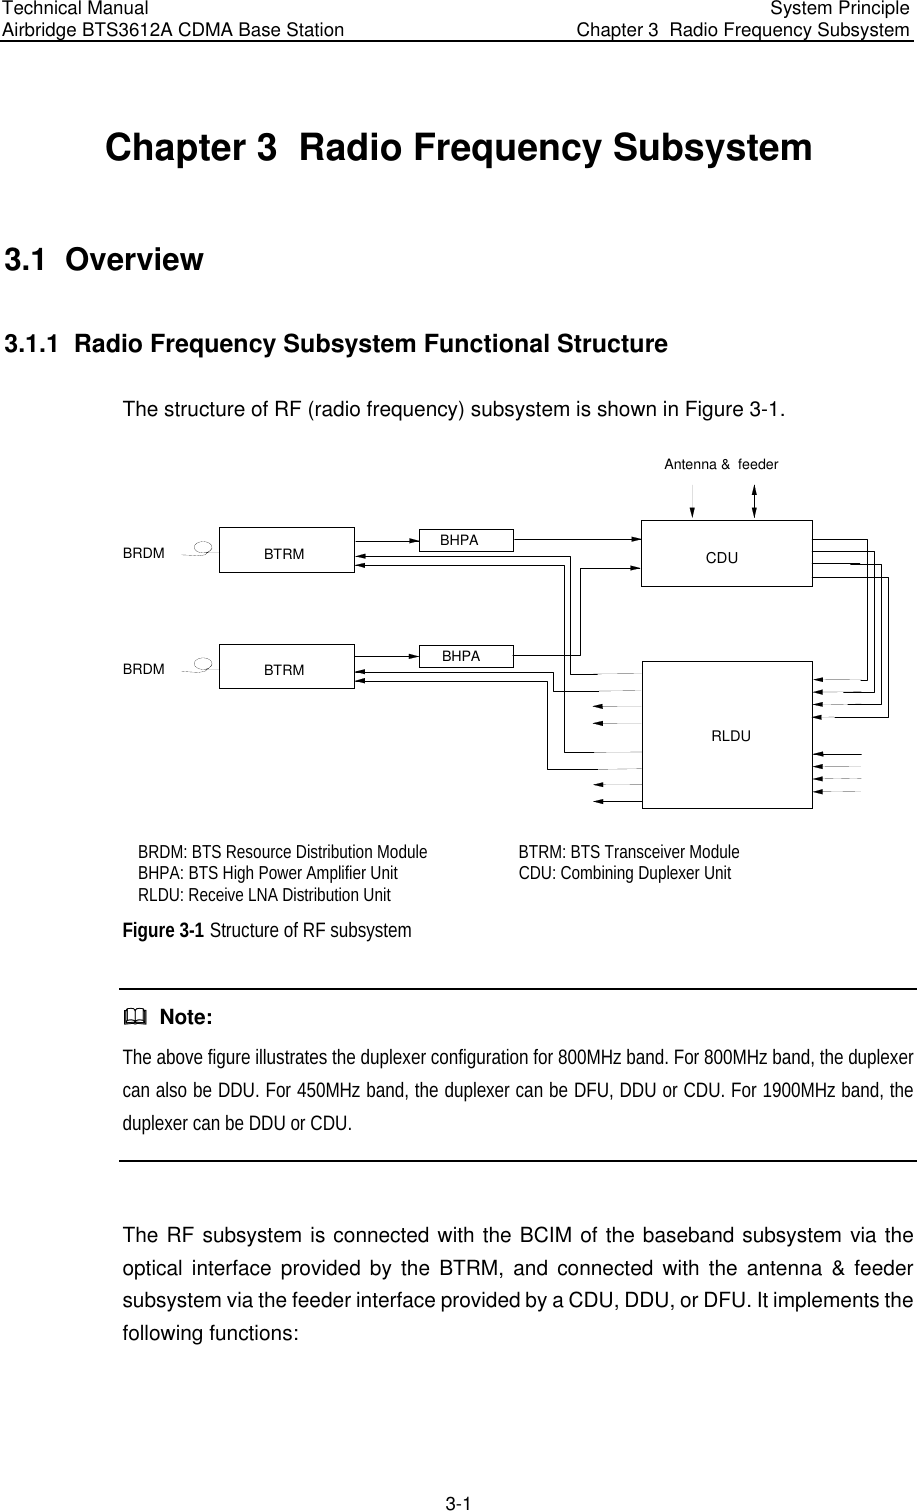 Technical Manual  Airbridge BTS3612A CDMA Base Station  System Principle Chapter 3  Radio Frequency Subsystem  3-1 Chapter 3  Radio Frequency Subsystem 3.1  Overview 3.1.1  Radio Frequency Subsystem Functional Structure The structure of RF (radio frequency) subsystem is shown in Figure 3-1. CDURLDUBHPABHPABTRMBTRMAntenna &amp;  feederBRDM       BRDM BRDM: BTS Resource Distribution Module  BTRM: BTS Transceiver Module BHPA: BTS High Power Amplifier Unit CDU: Combining Duplexer Unit RLDU: Receive LNA Distribution Unit   Figure 3-1 Structure of RF subsystem   Note: The above figure illustrates the duplexer configuration for 800MHz band. For 800MHz band, the duplexer can also be DDU. For 450MHz band, the duplexer can be DFU, DDU or CDU. For 1900MHz band, the duplexer can be DDU or CDU.  The RF subsystem is connected with the BCIM of the baseband subsystem via the optical interface provided by the BTRM, and connected with the antenna &amp; feeder subsystem via the feeder interface provided by a CDU, DDU, or DFU. It implements the following functions: 